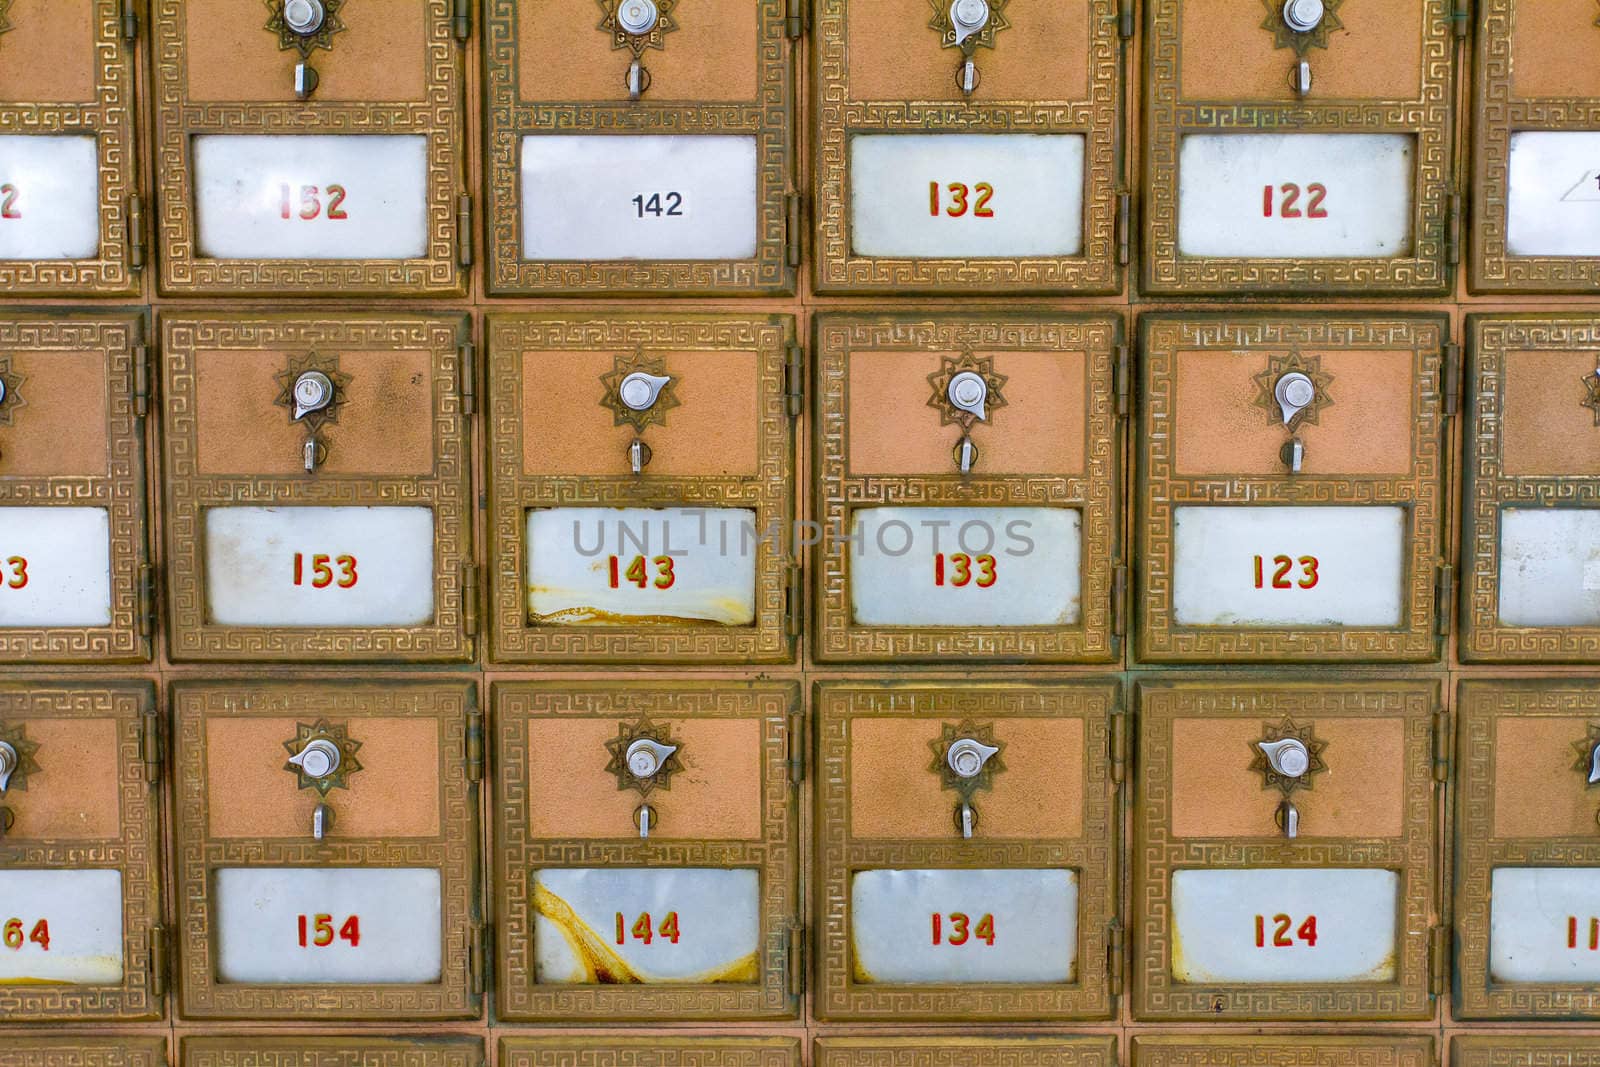 This photo shows the many po boxes at the post office. The mail boxes are lined up in rows and columns for organization.